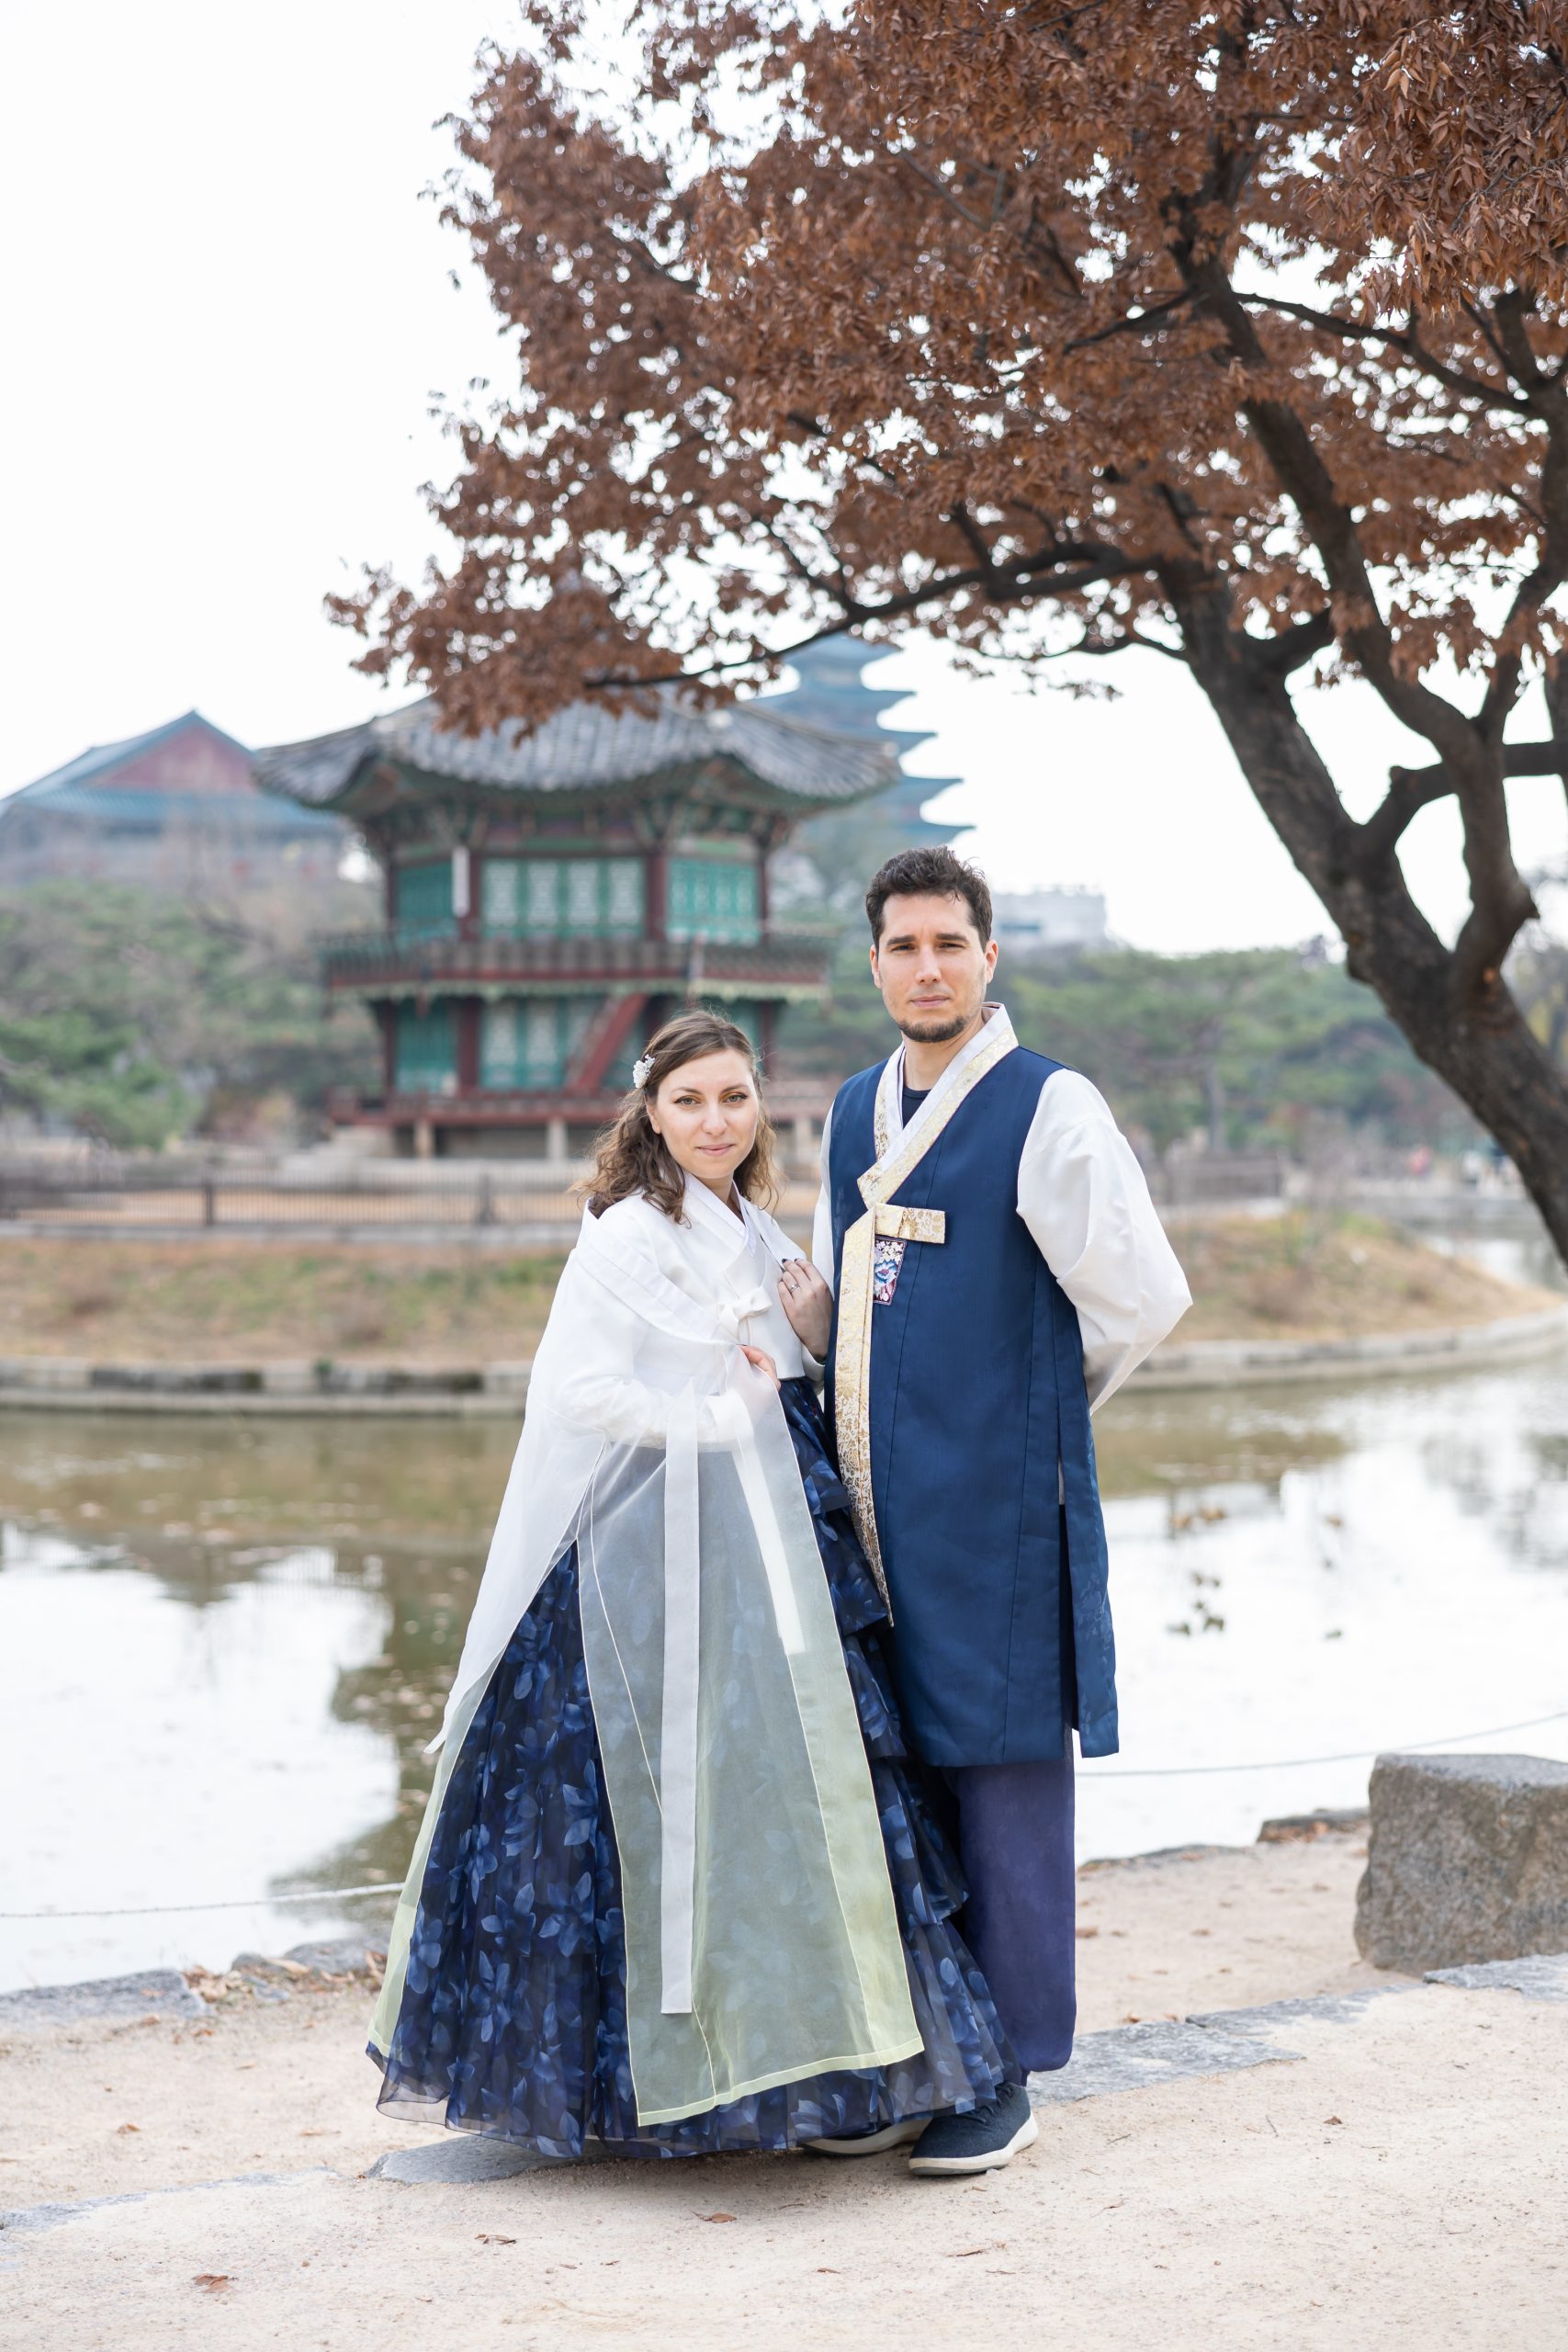 Wearing a traditional Korean dress called Hanbok in Seoul